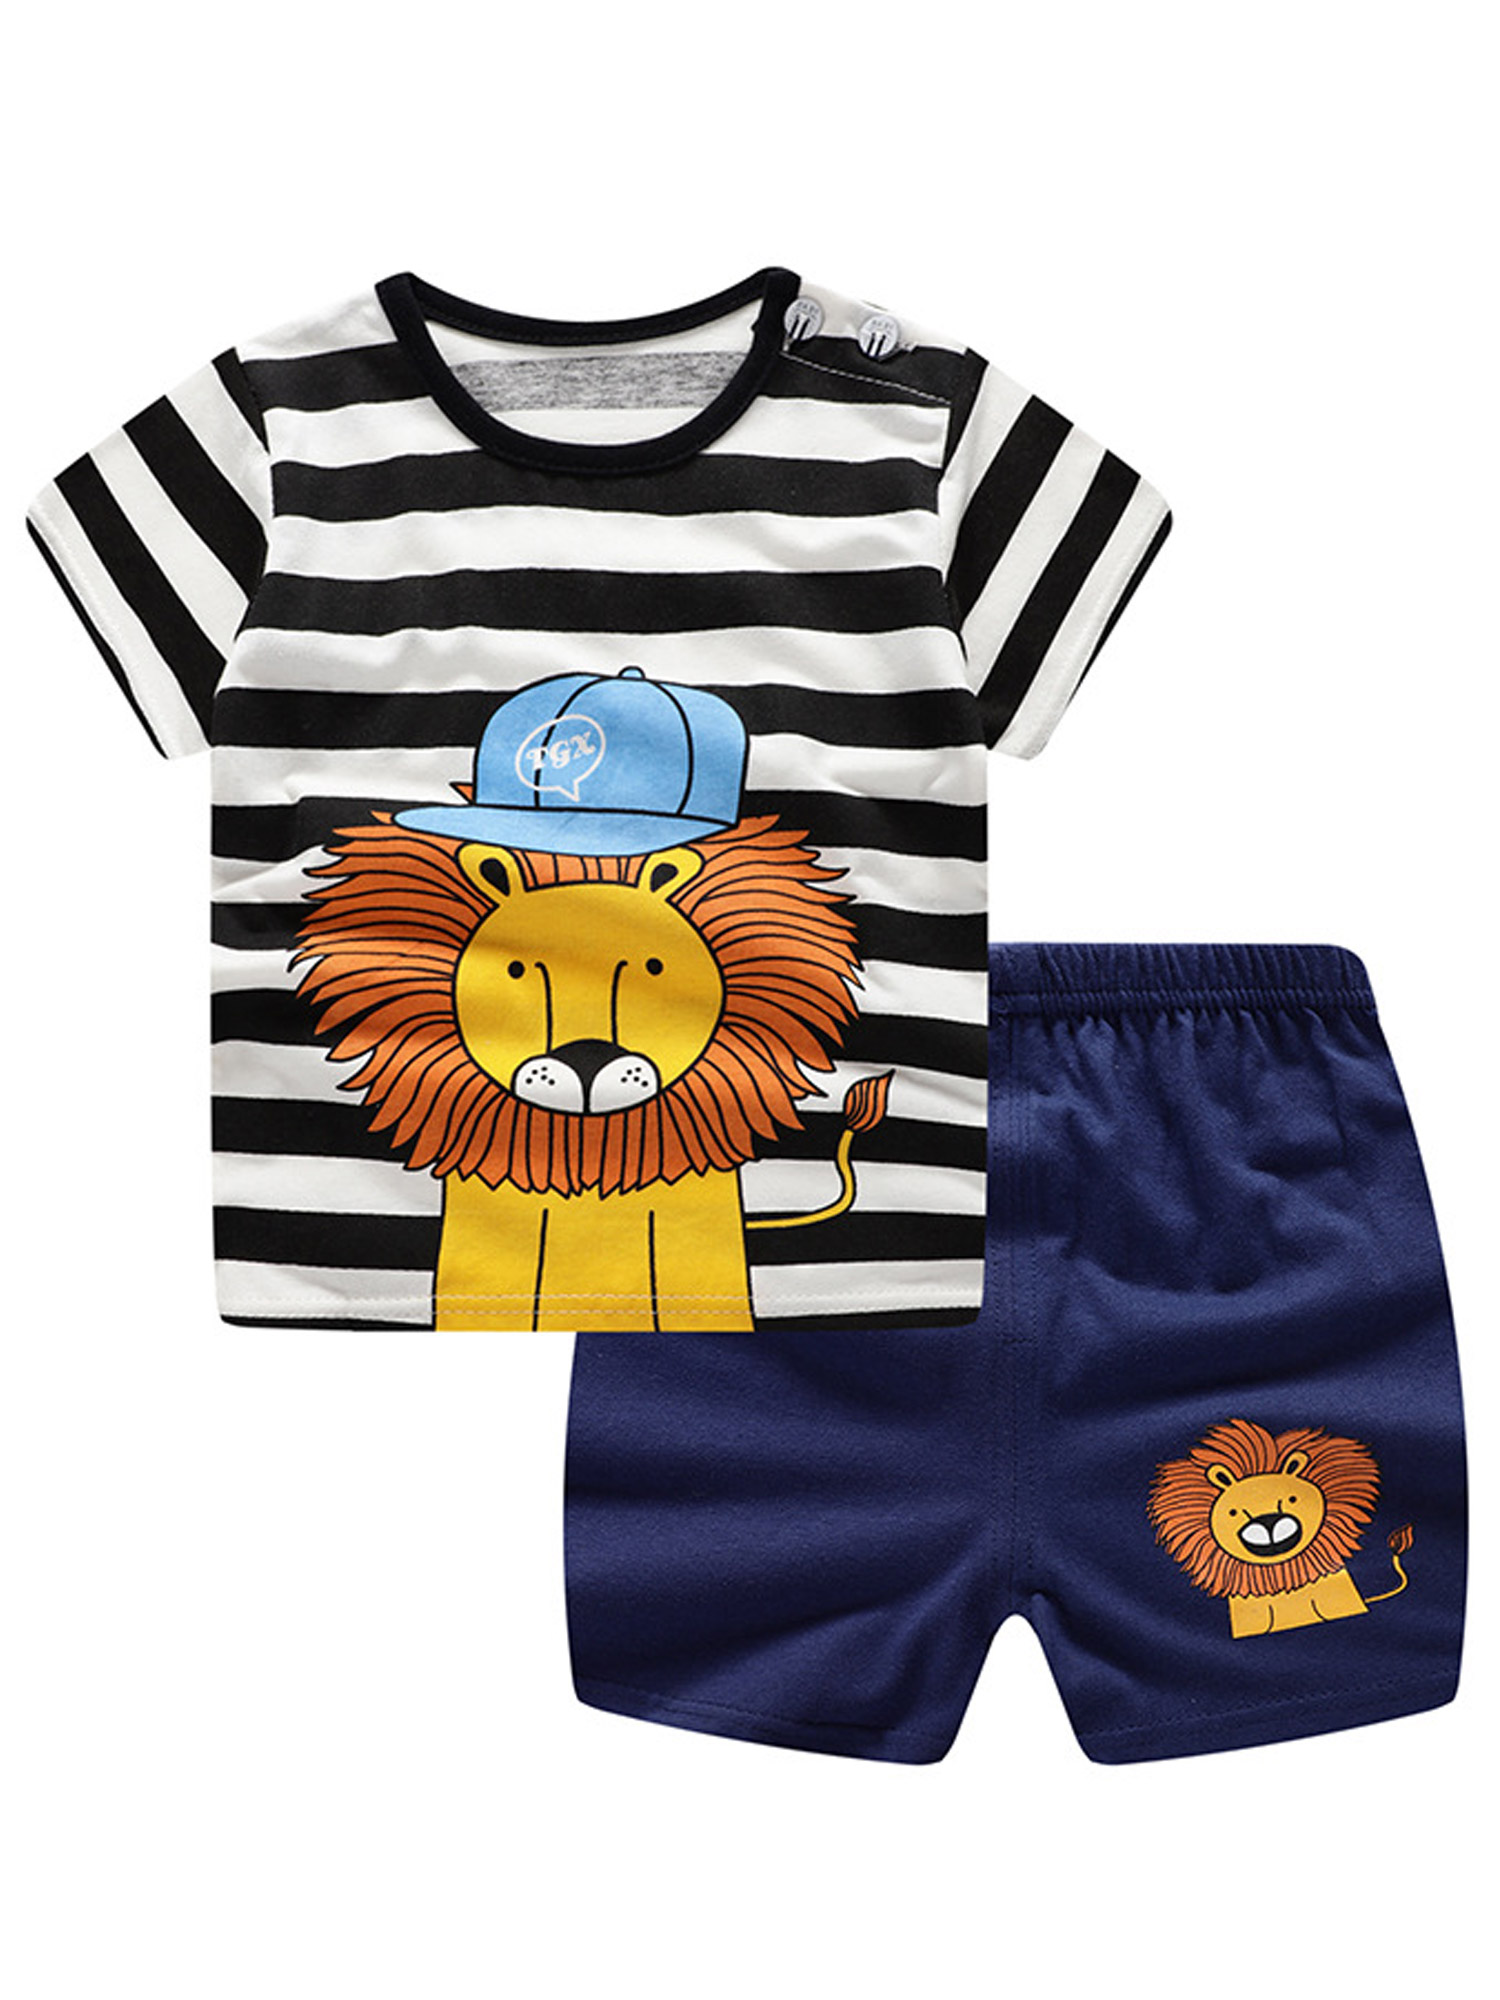 Ketty More Toddler Boy Unique Printed Comfortable Outfit Set